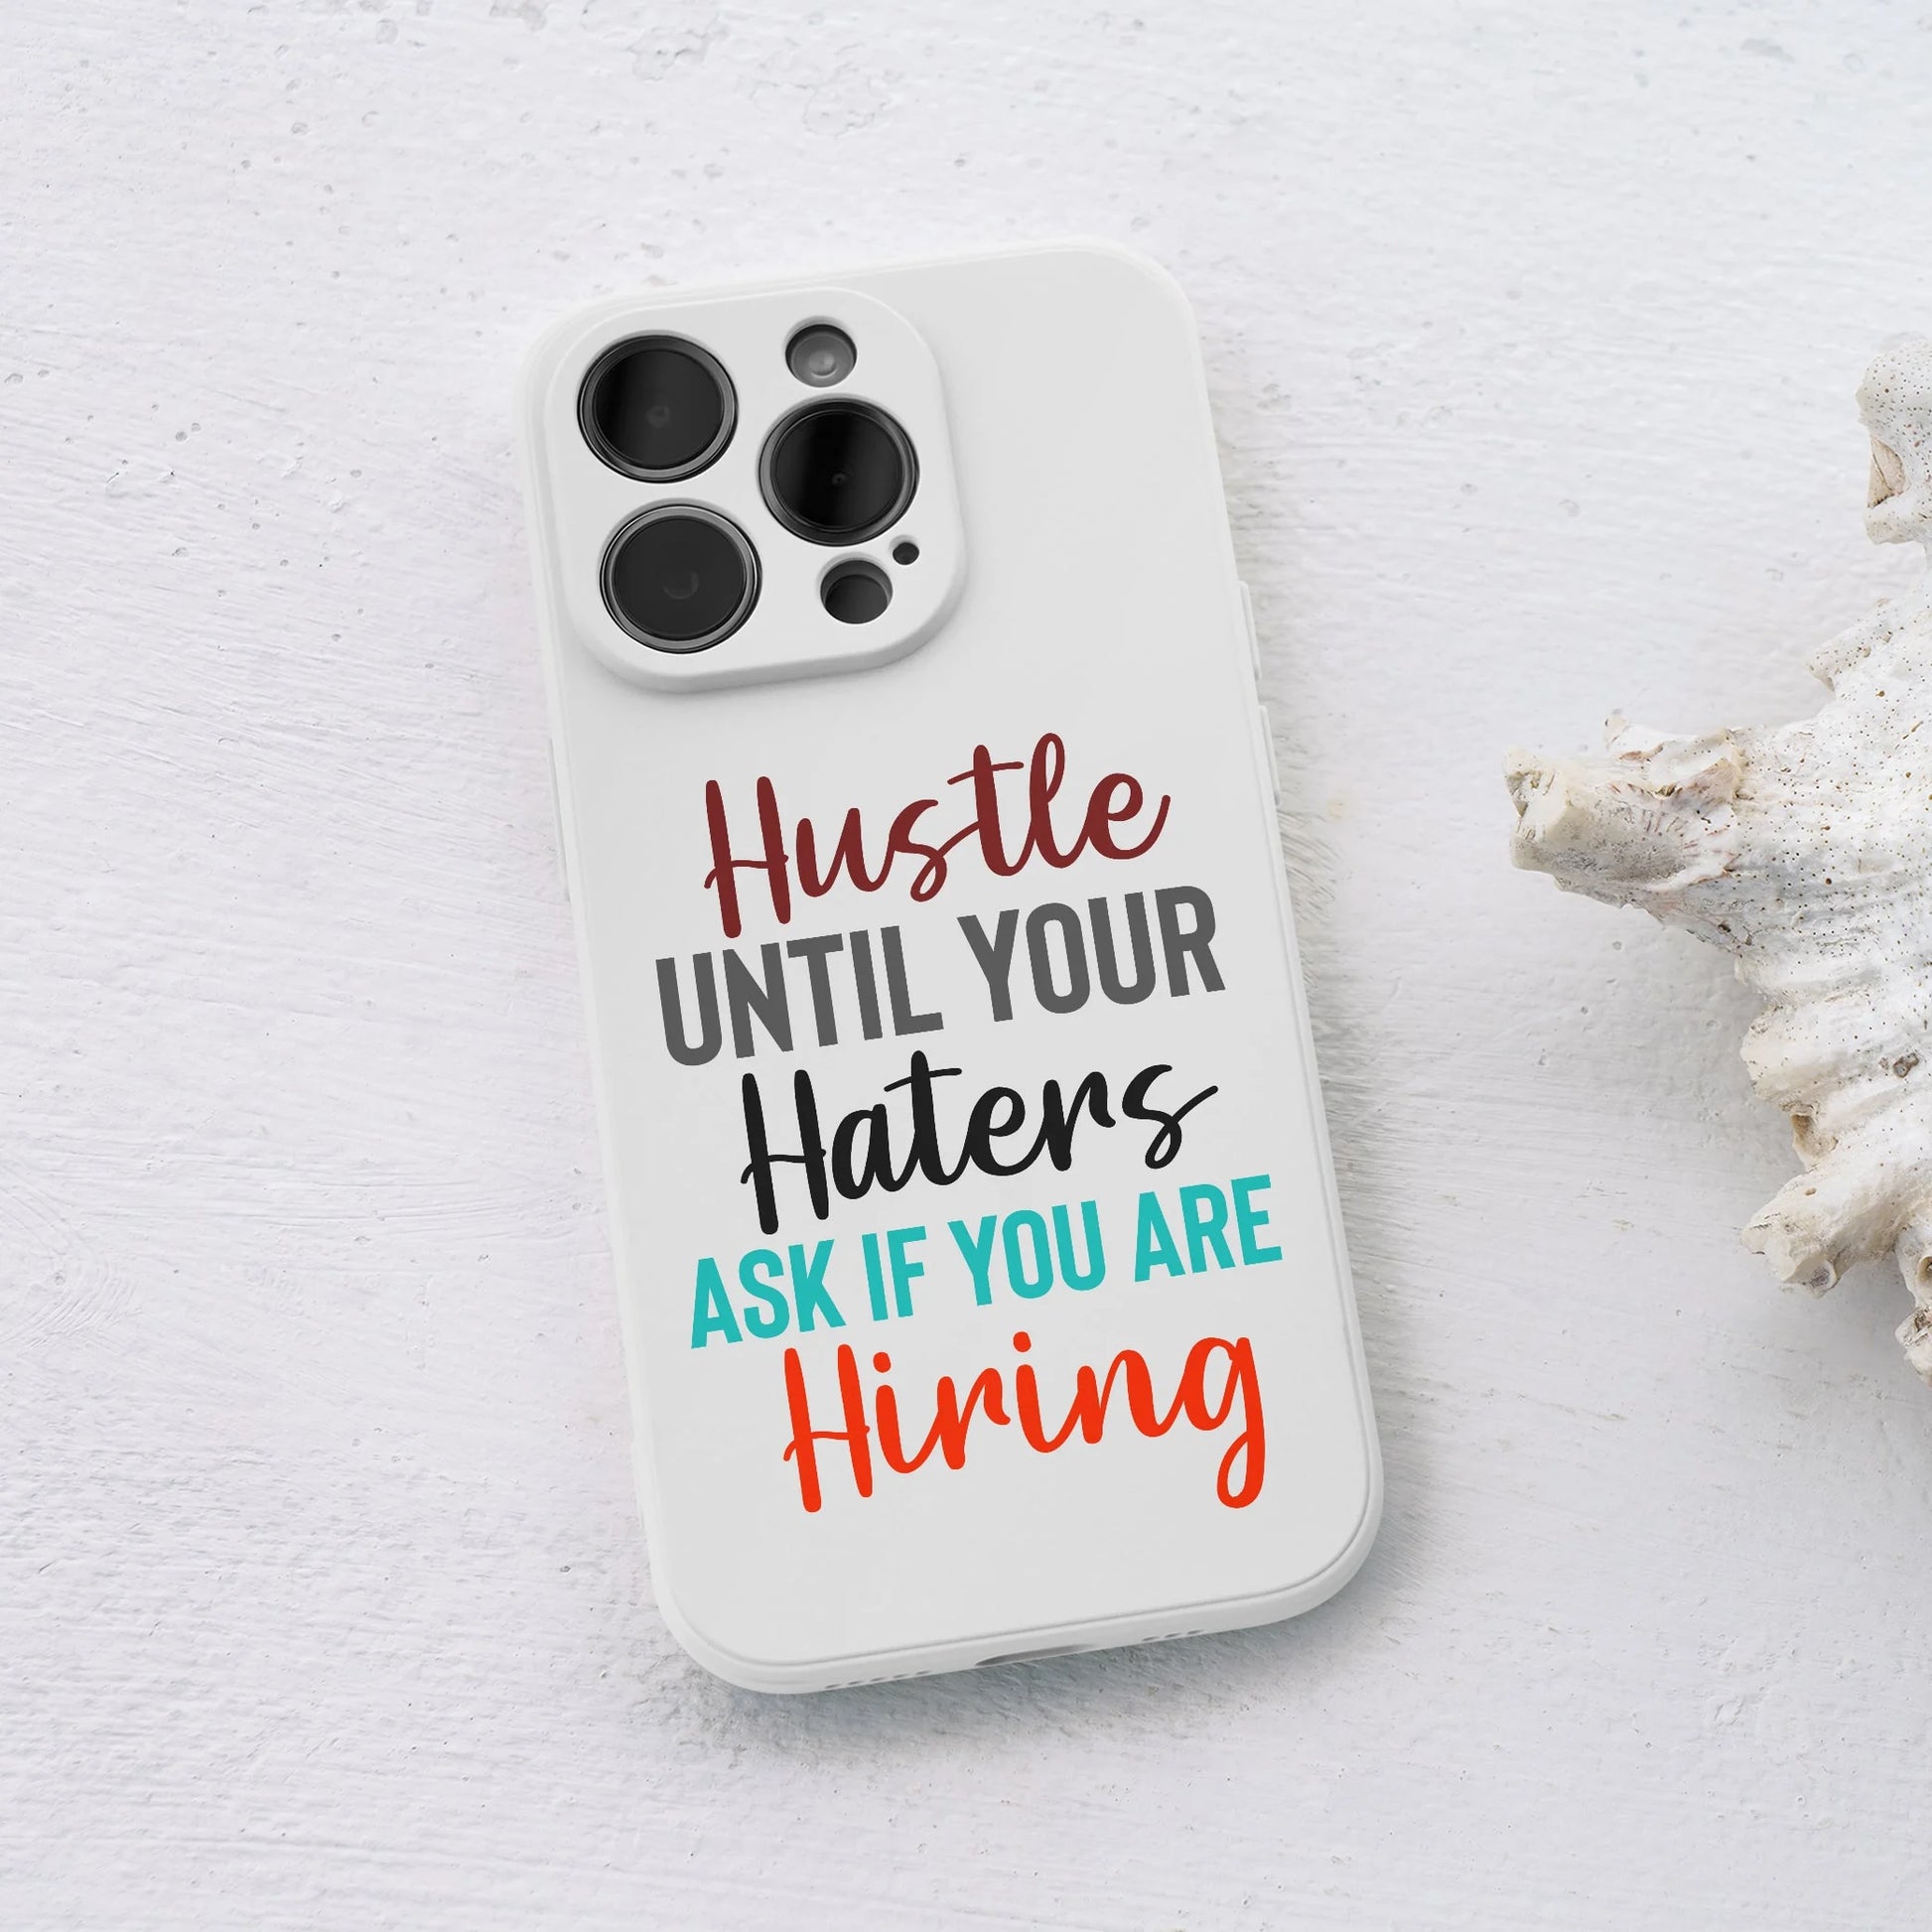 Hustle Until Your Haters Ask If You Are Hiring Mobile Cover